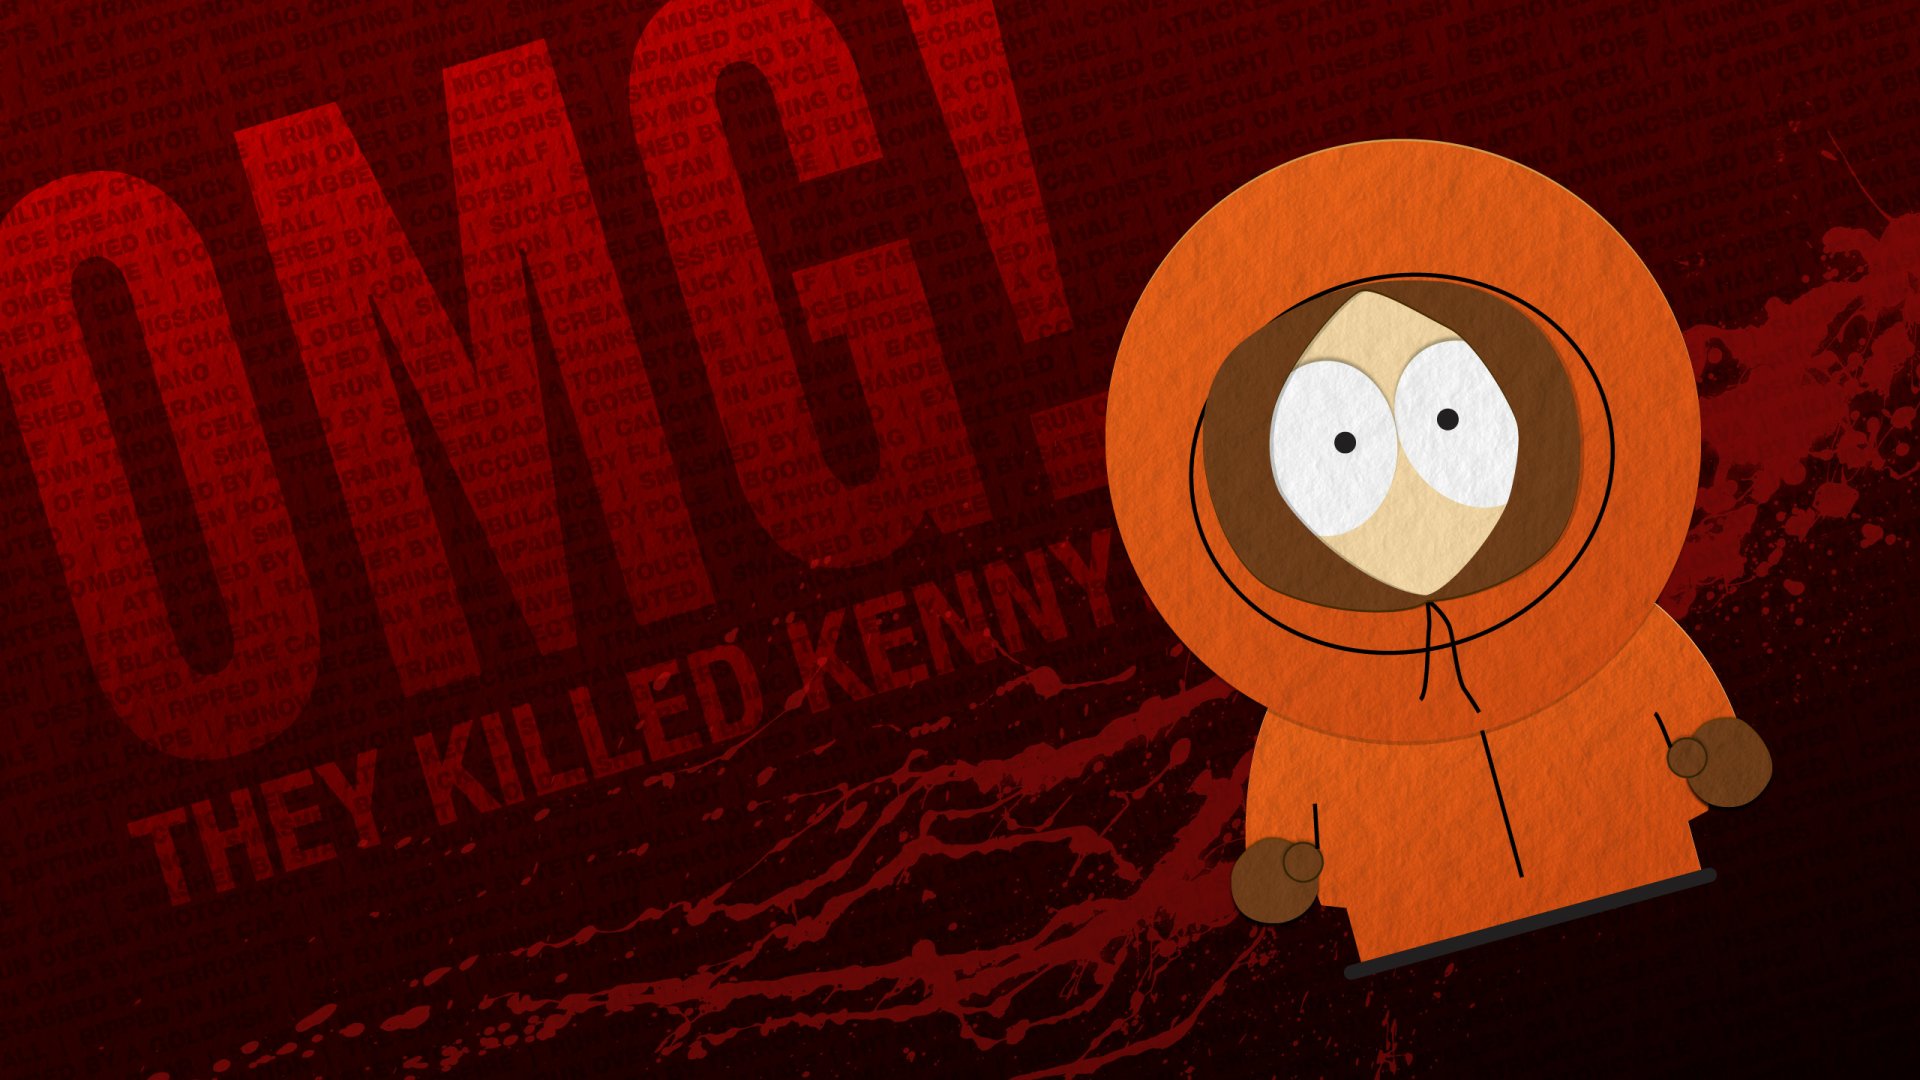 South Park HD Wallpaper | Background Image | 2560x1440